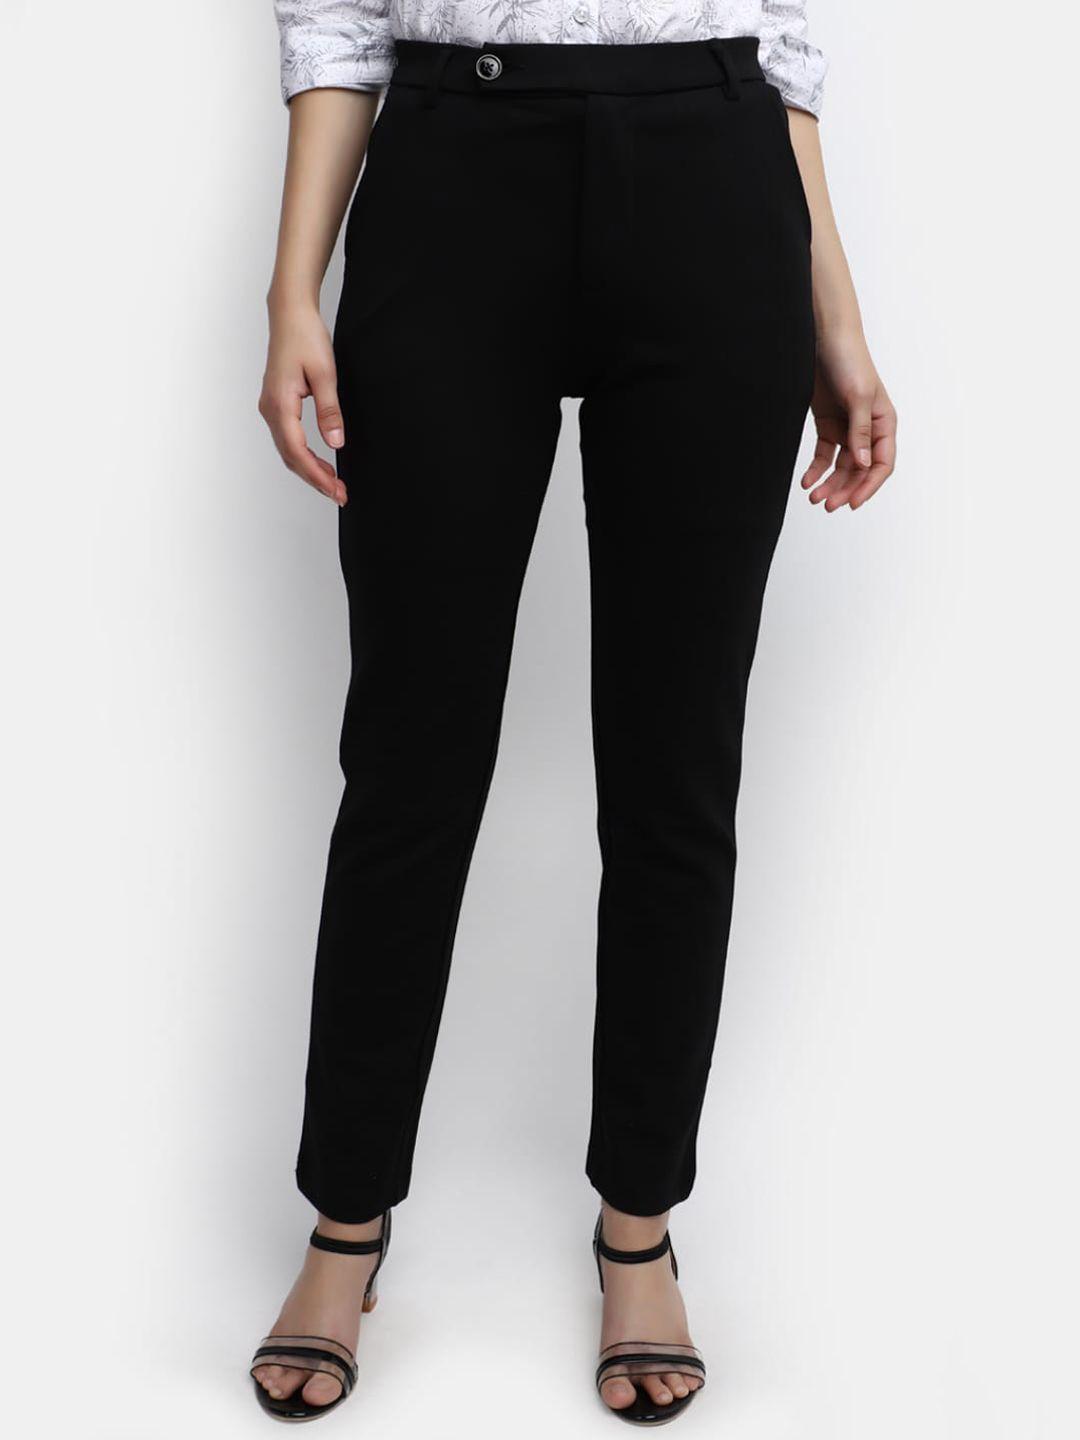 v-mart women clean look mid rise cotton formal trousers